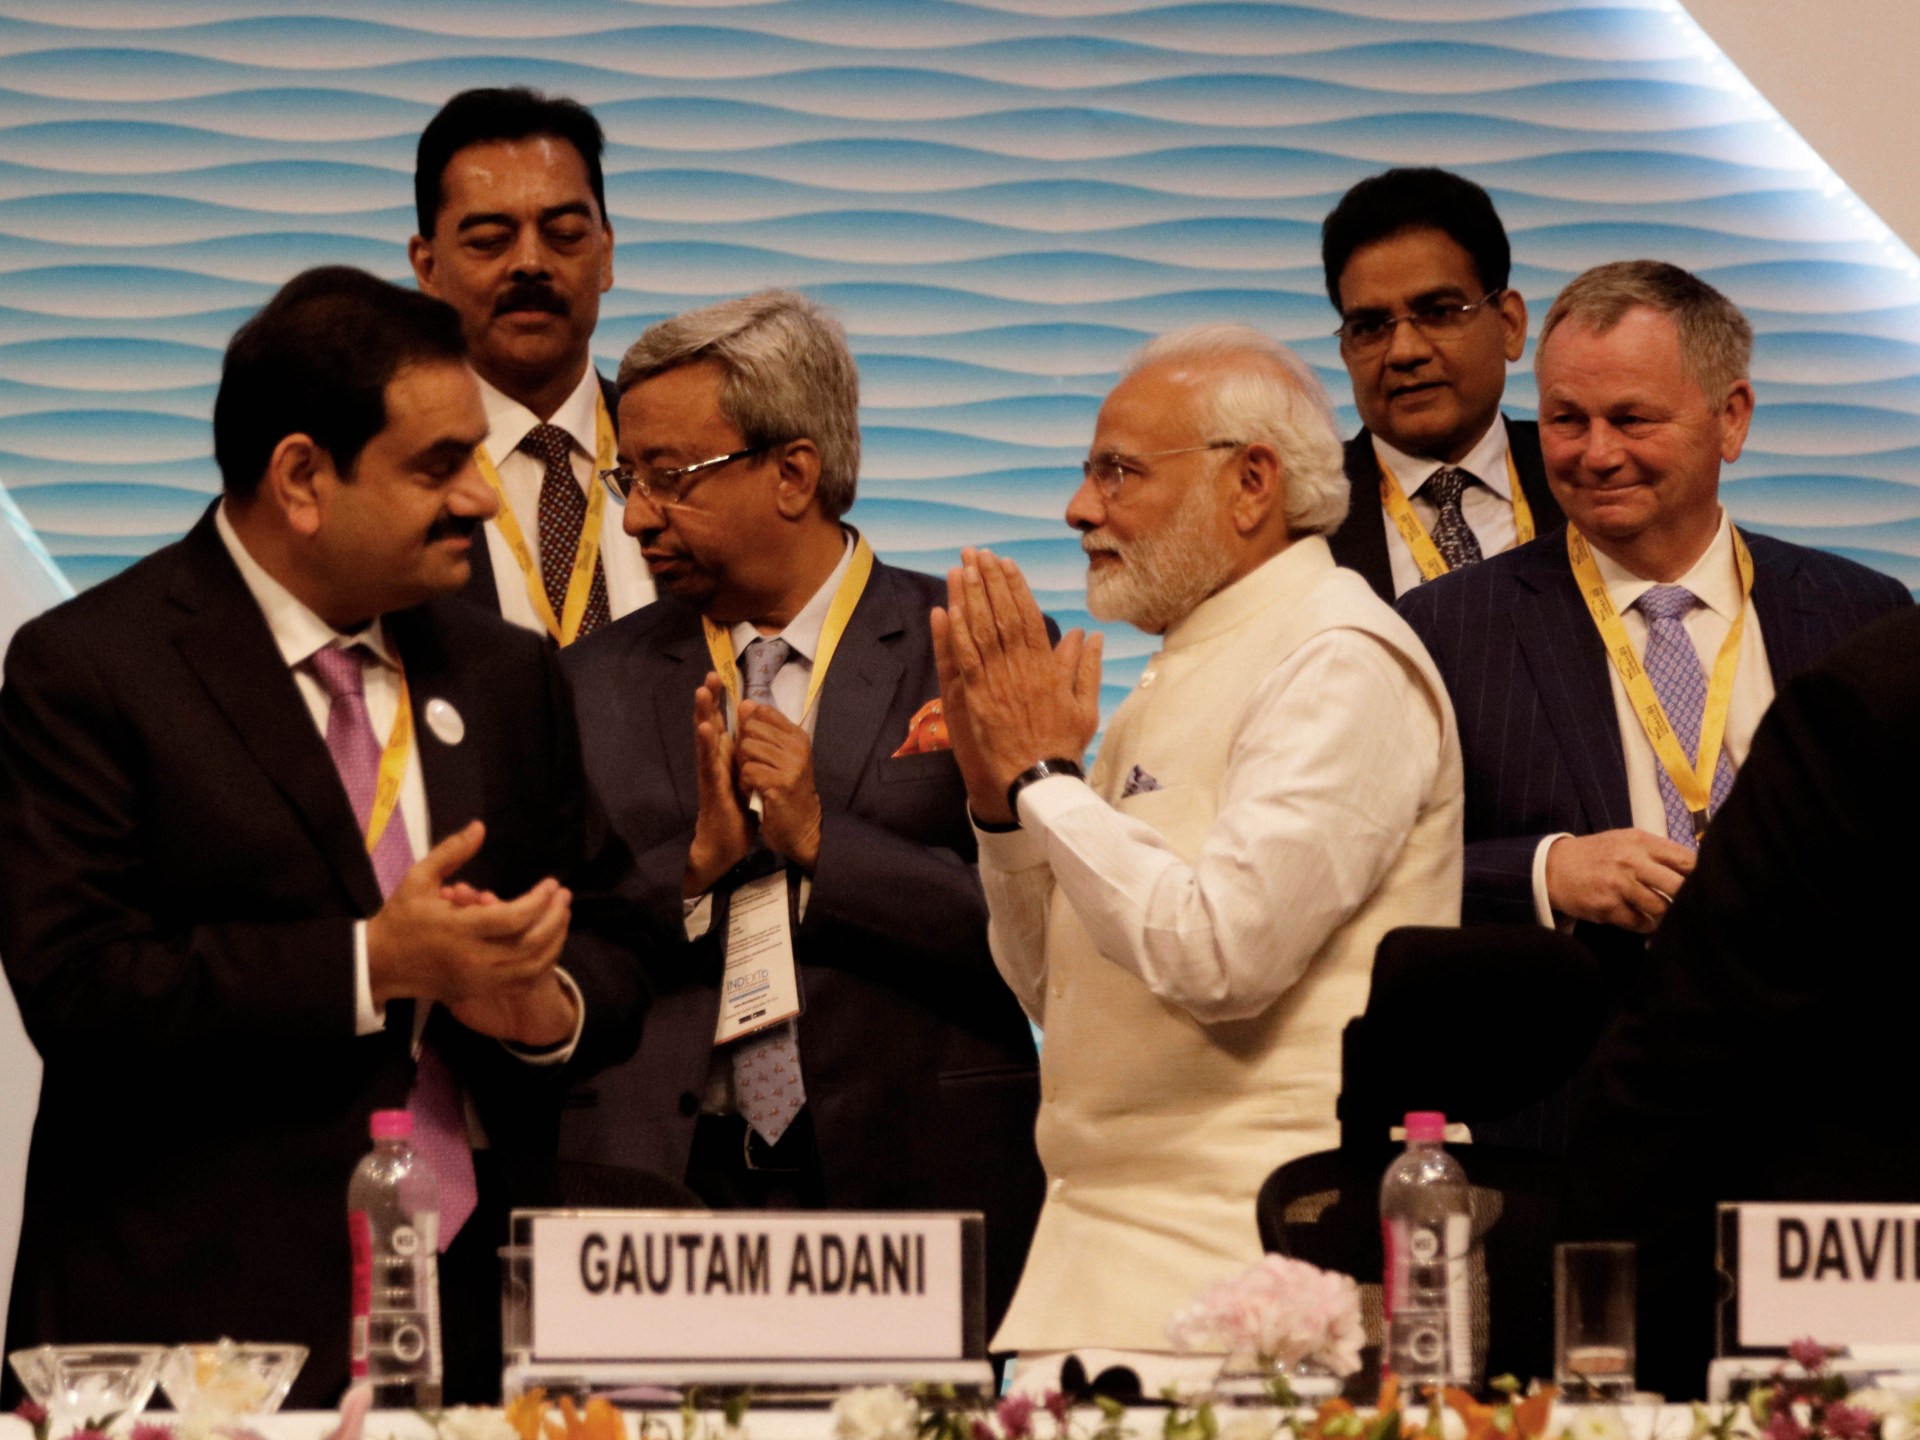 Bangladesh in a hot seat over Adani’s power deal | Business and Economy